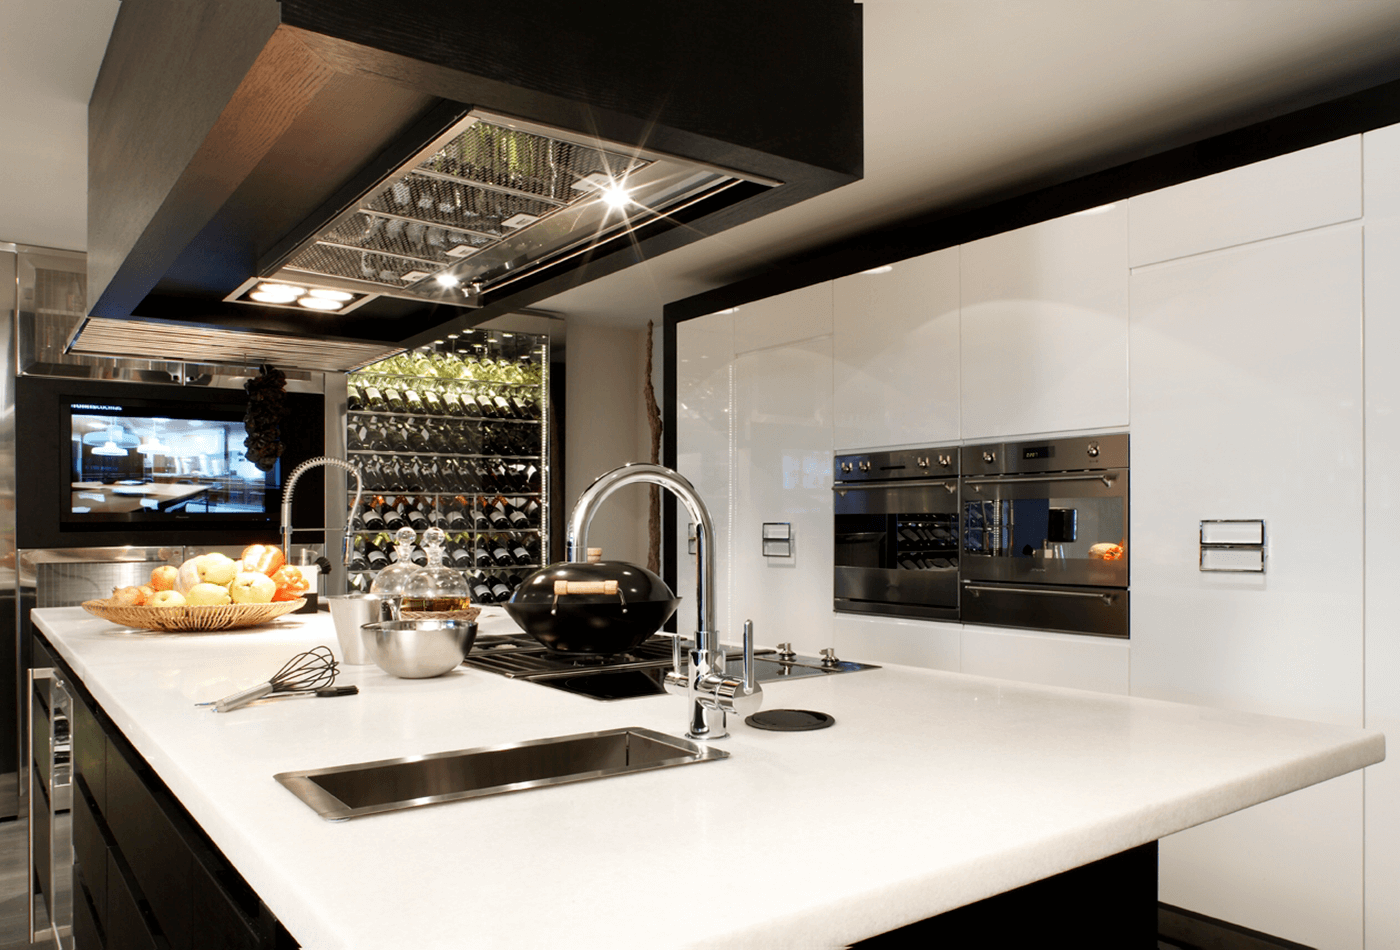 Things that You Need to Know about Silestone Kitchen Surfaces